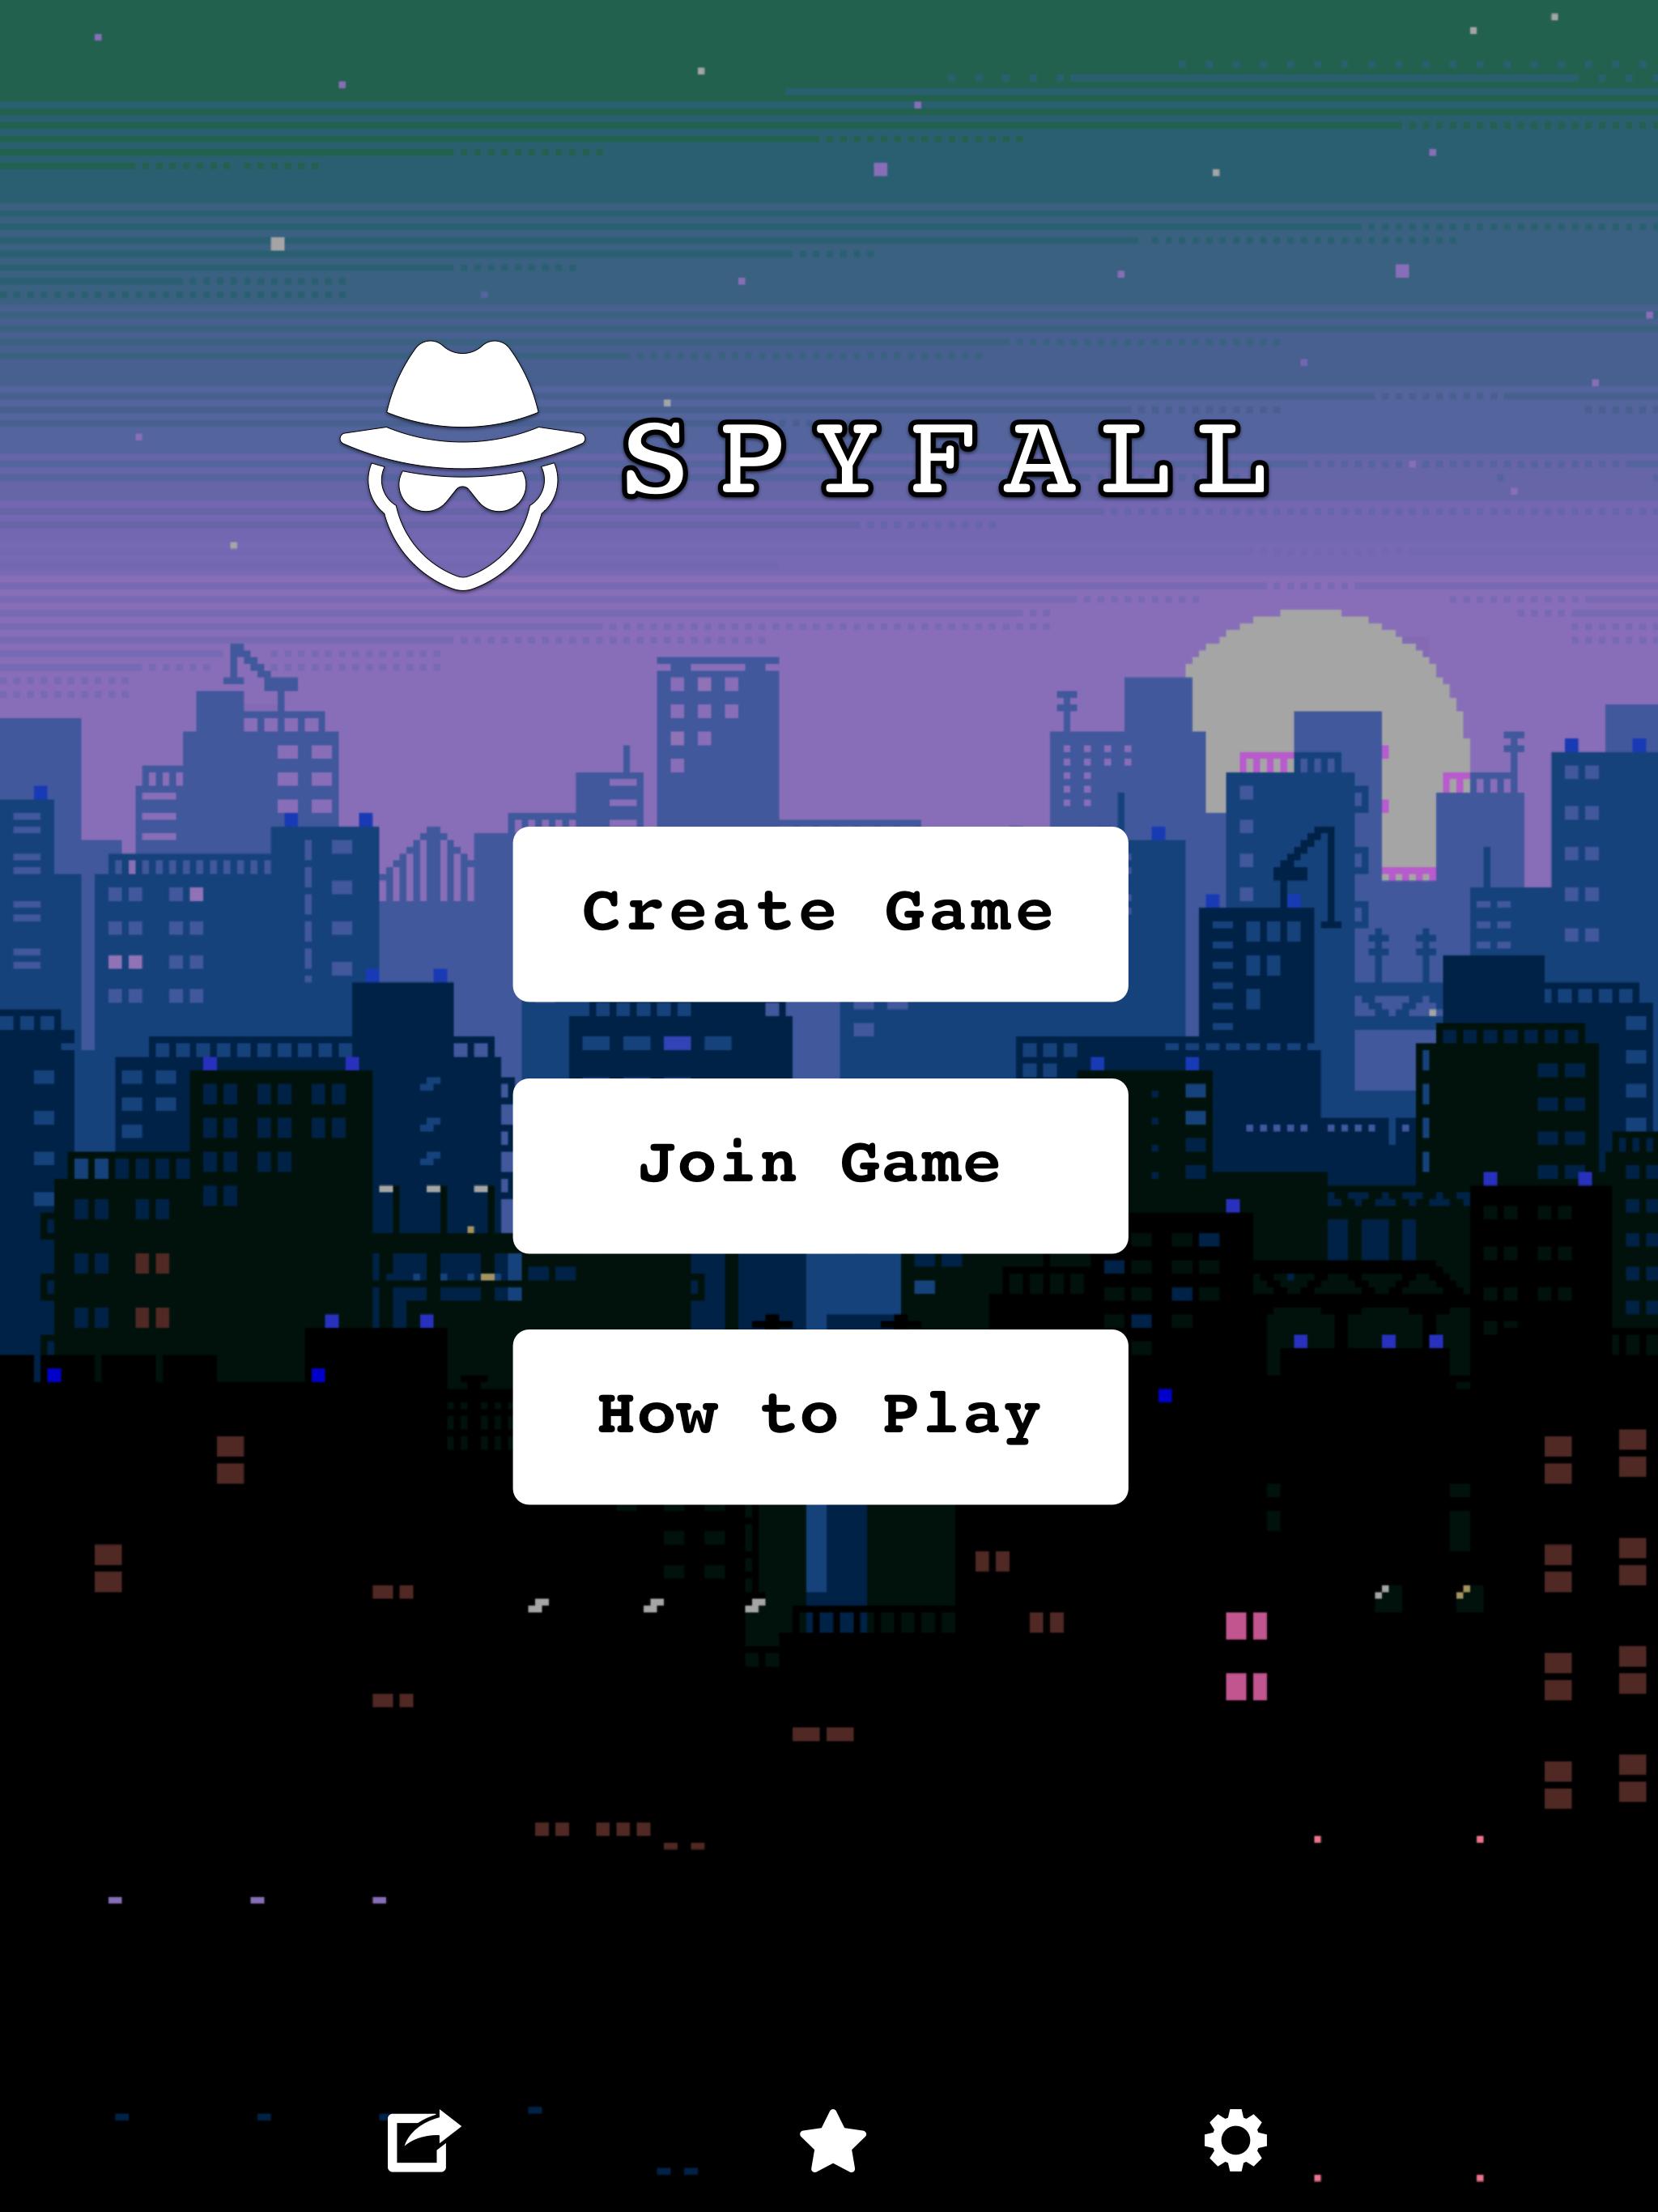 Spyfall - Multiplayer Guess Who is the Spy Game for Android - APK Download